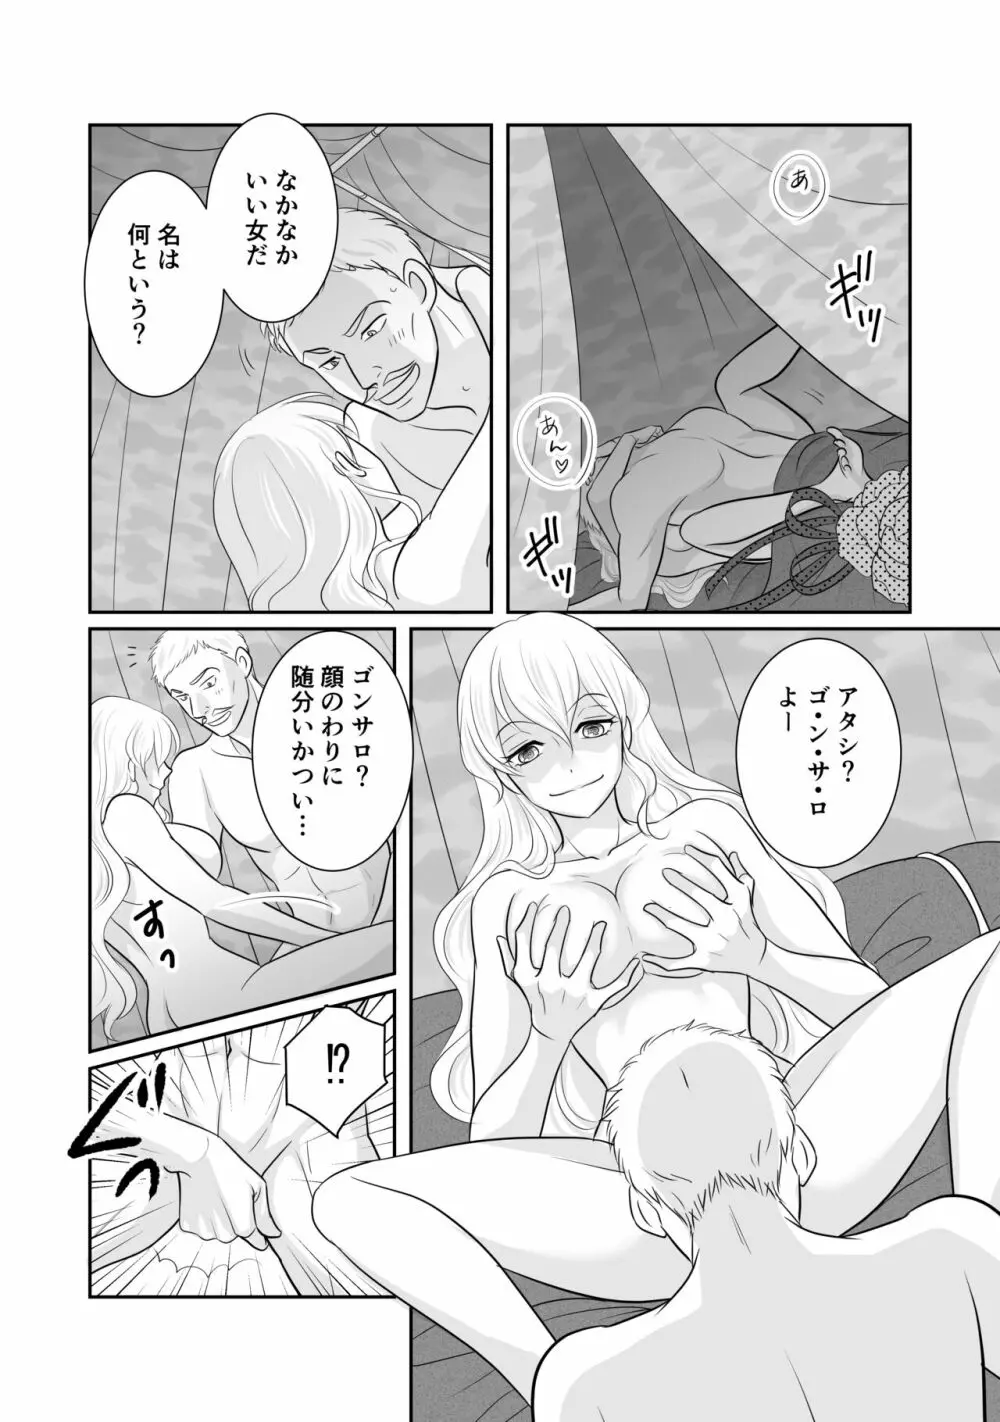 Misogyny Conquest Chapter 6 6ページ